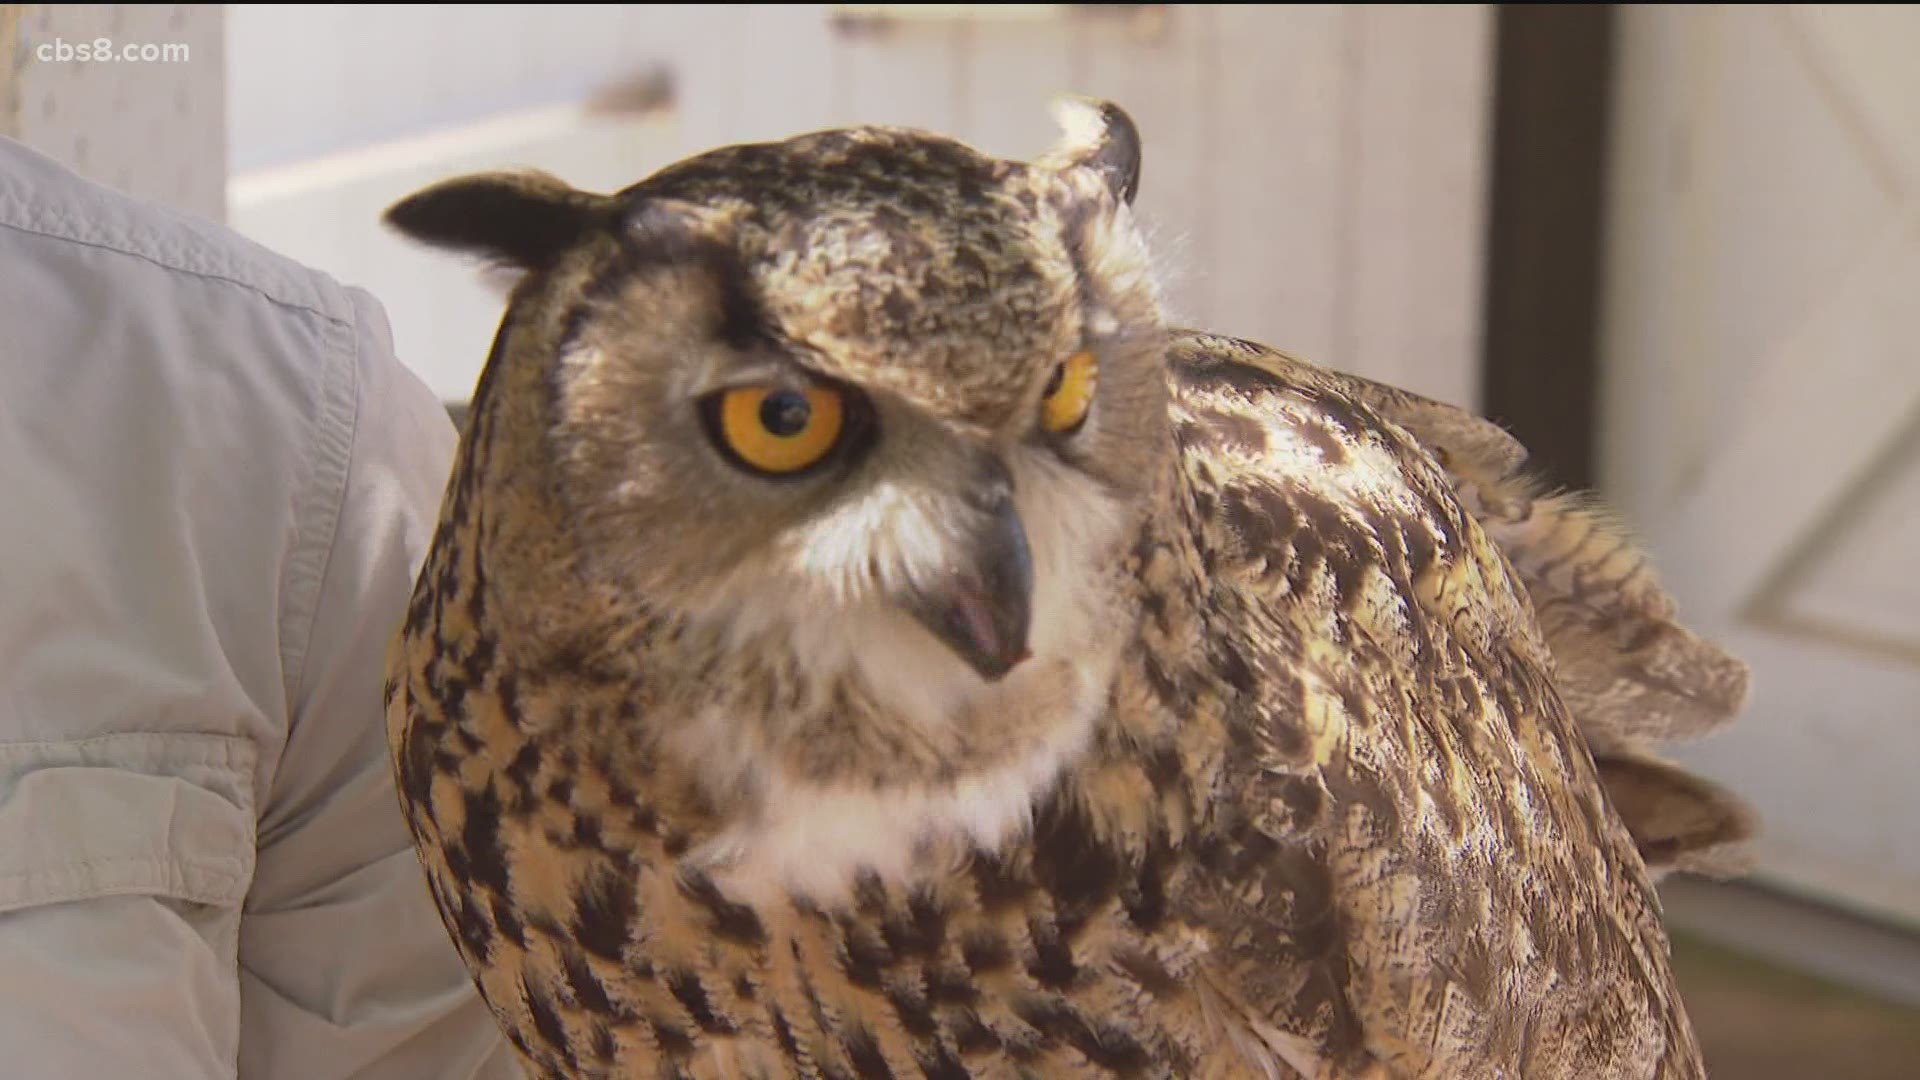 Hilary Hankey is an avian specialist and couldn't believe her fortune as a pair of Great Horned Owls set up home on her property.